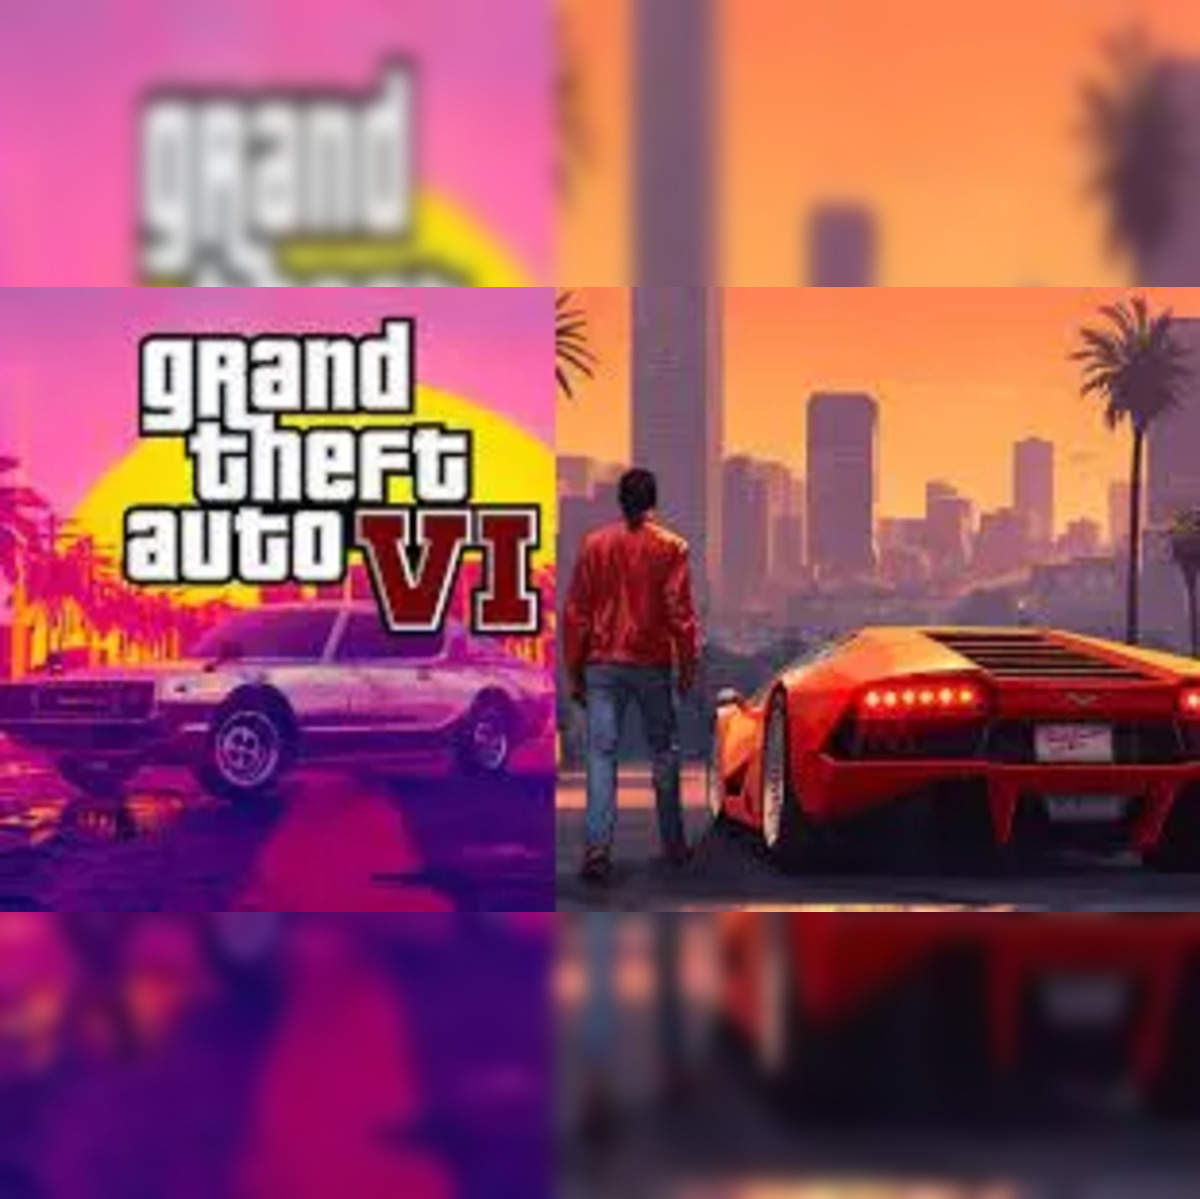 Rockstar Games to announce Grand Theft Auto 6 video game this week: Report